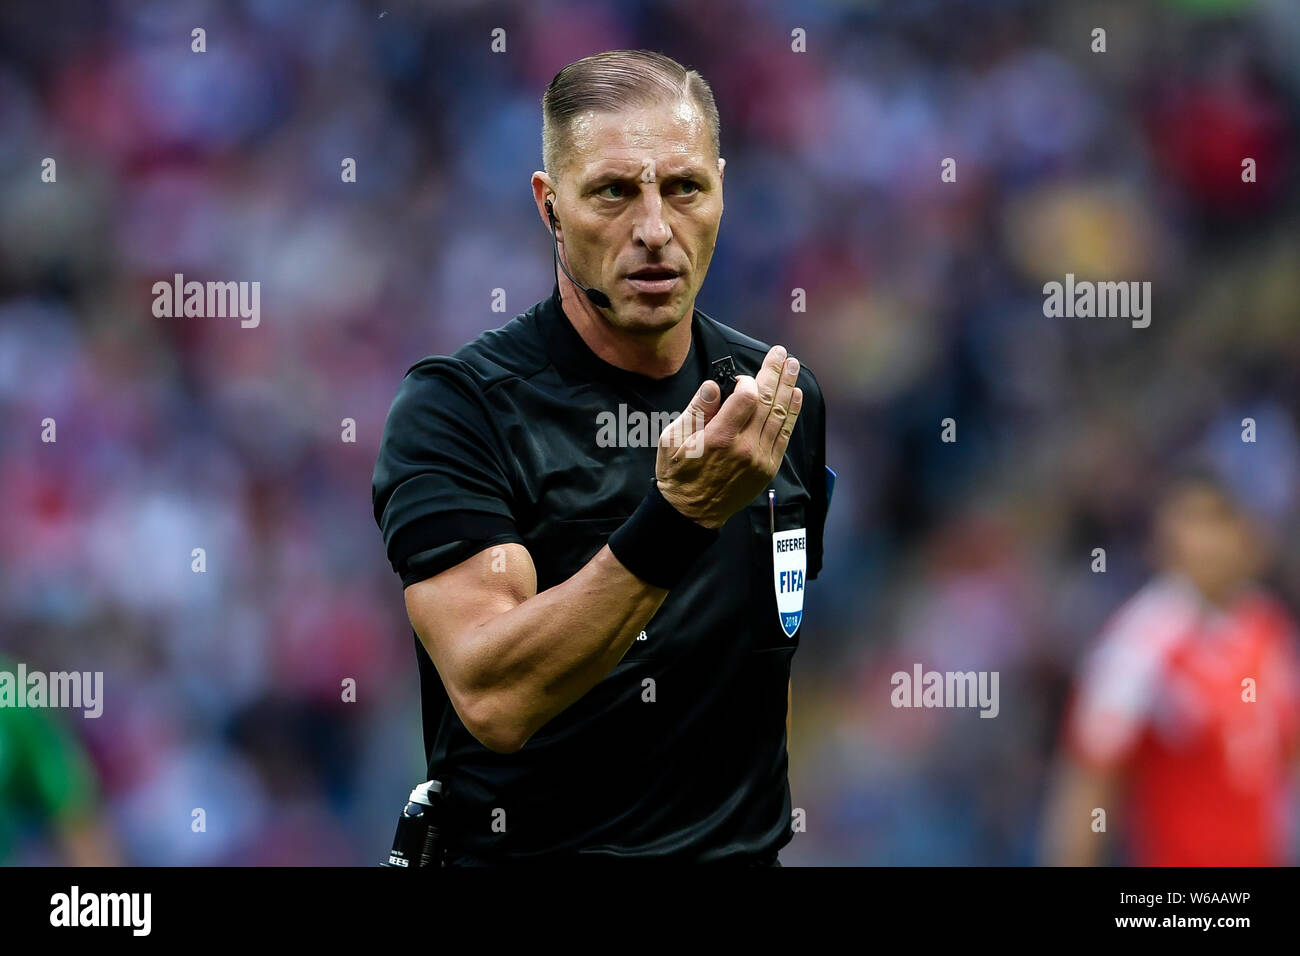 Referee Nestor Pitana is pictured in the Group A match between Russia and Saudi Arabia during the 2018 FIFA World Cup in Moscow, Russia, 14 June 2018. Stock Photo